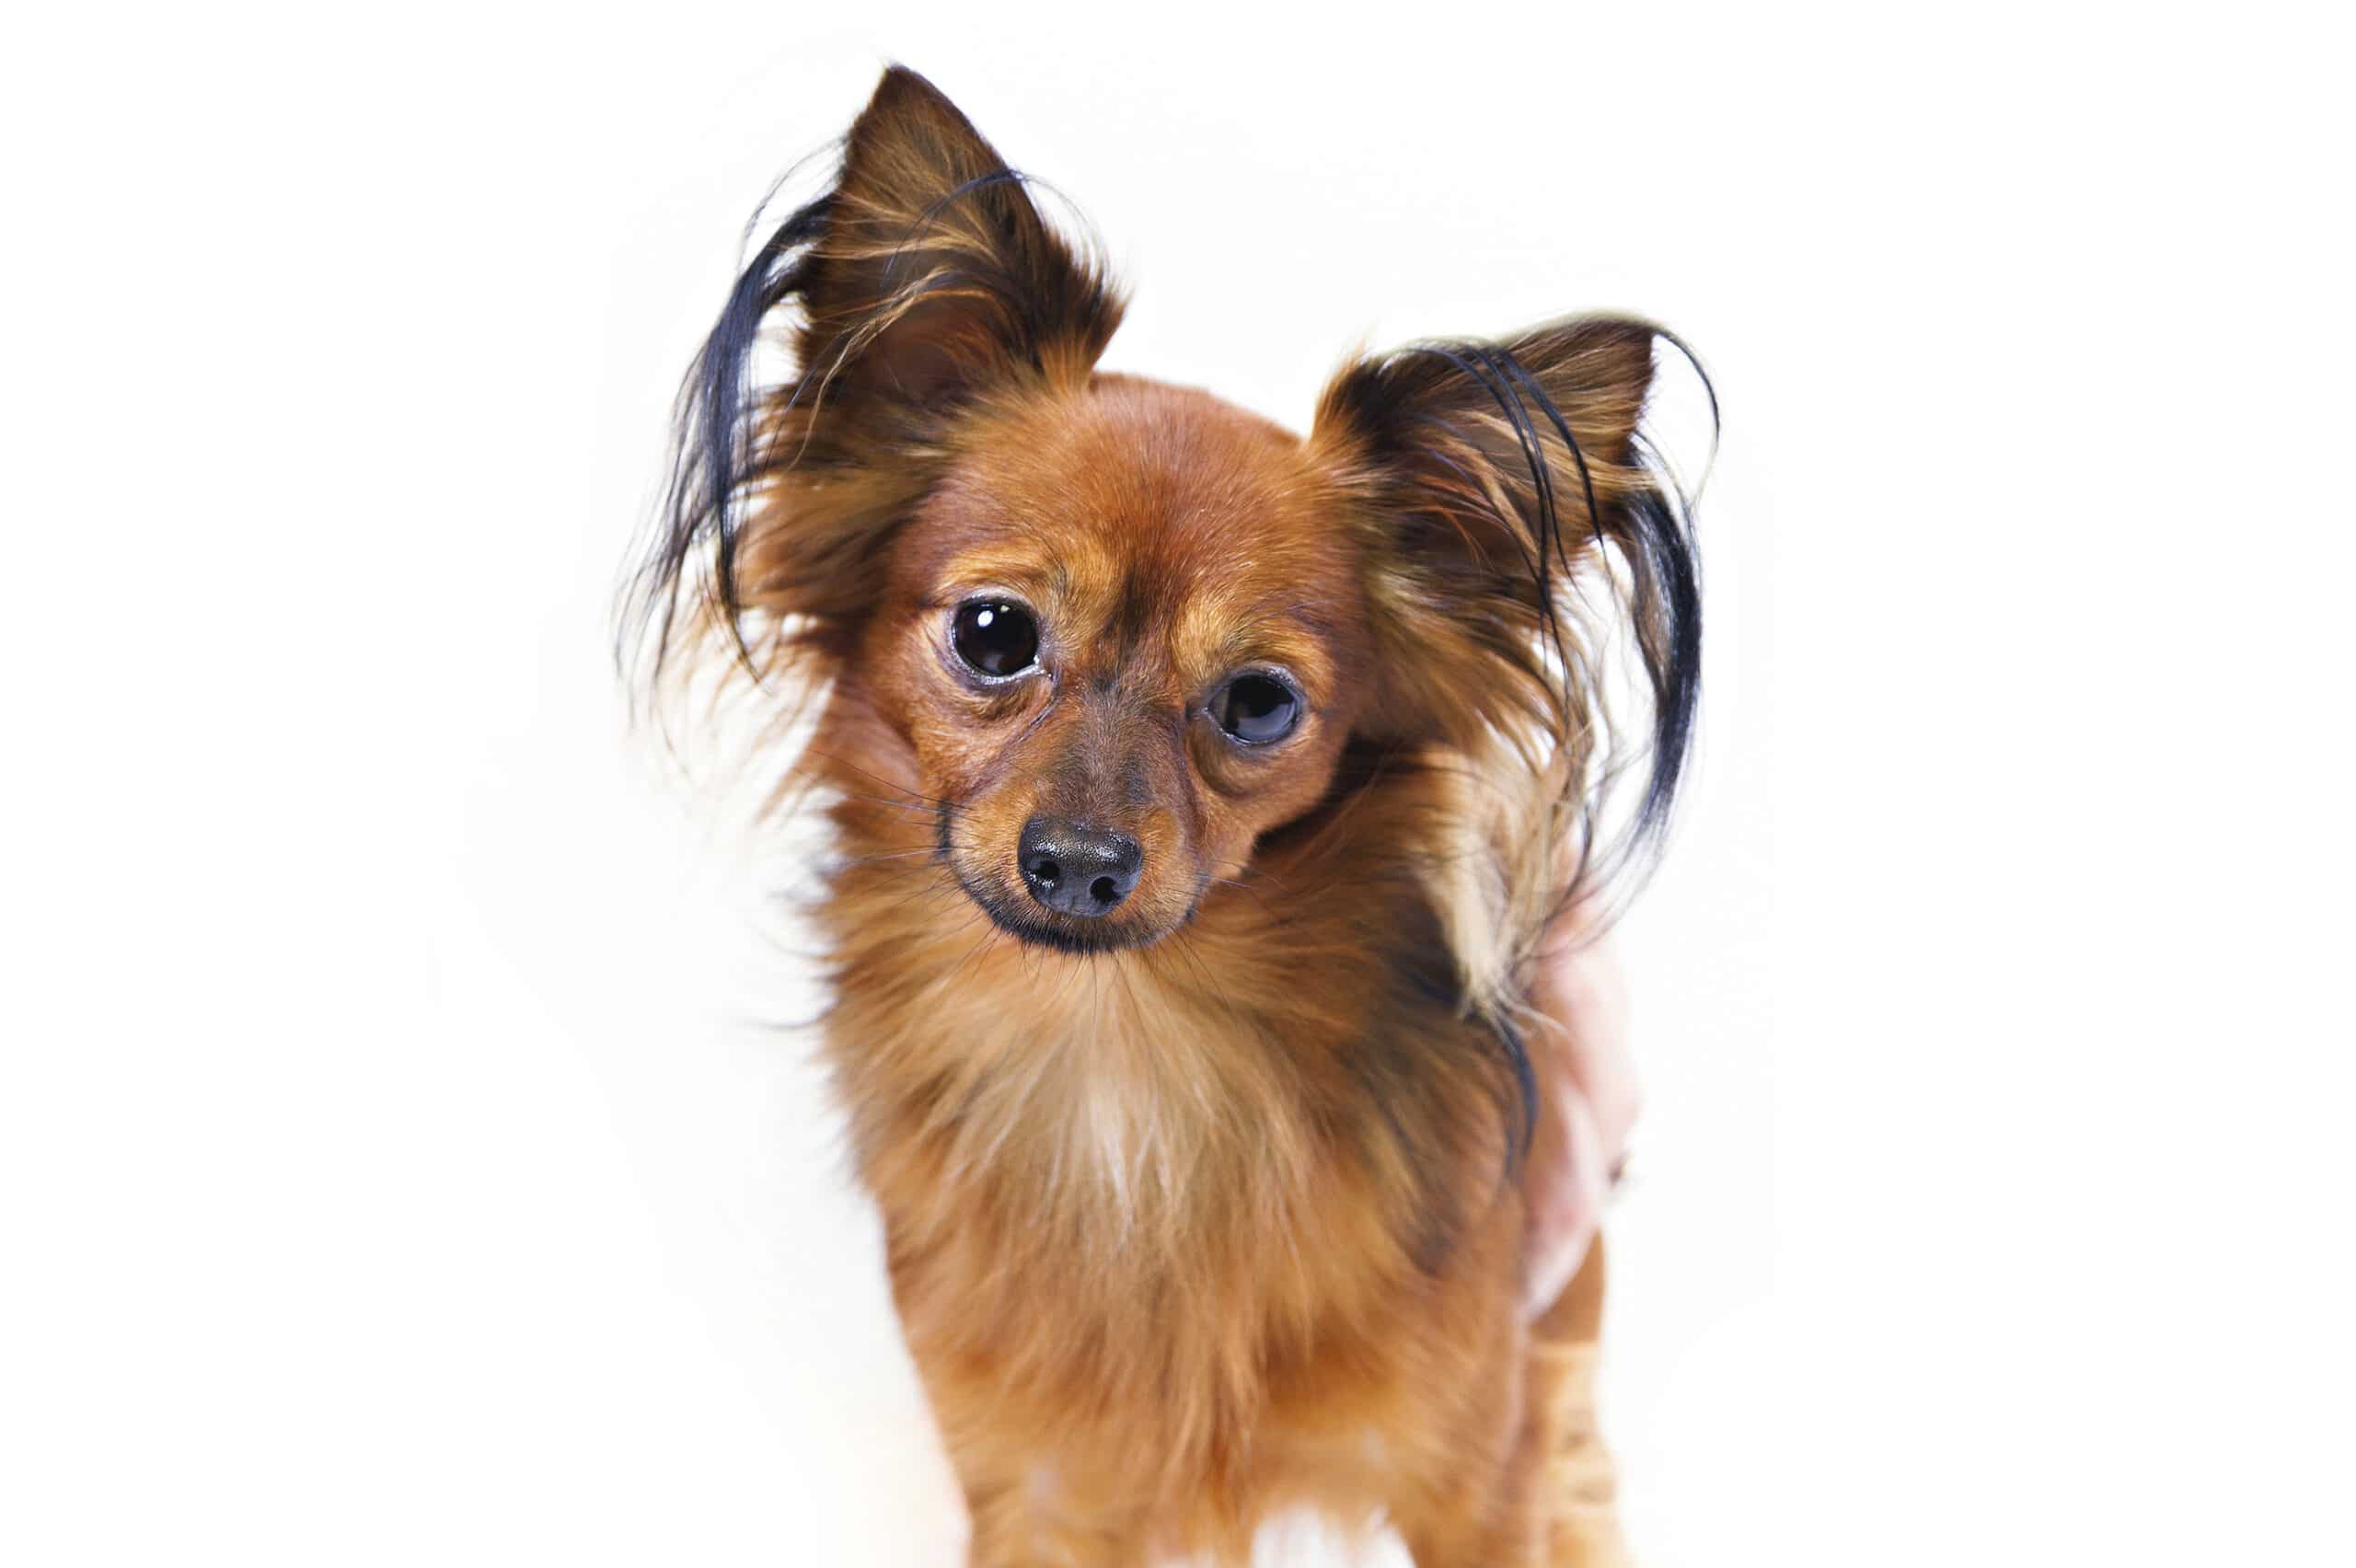 American Kennel Club adds 2 dog breeds to purebred lineup NewsLooks